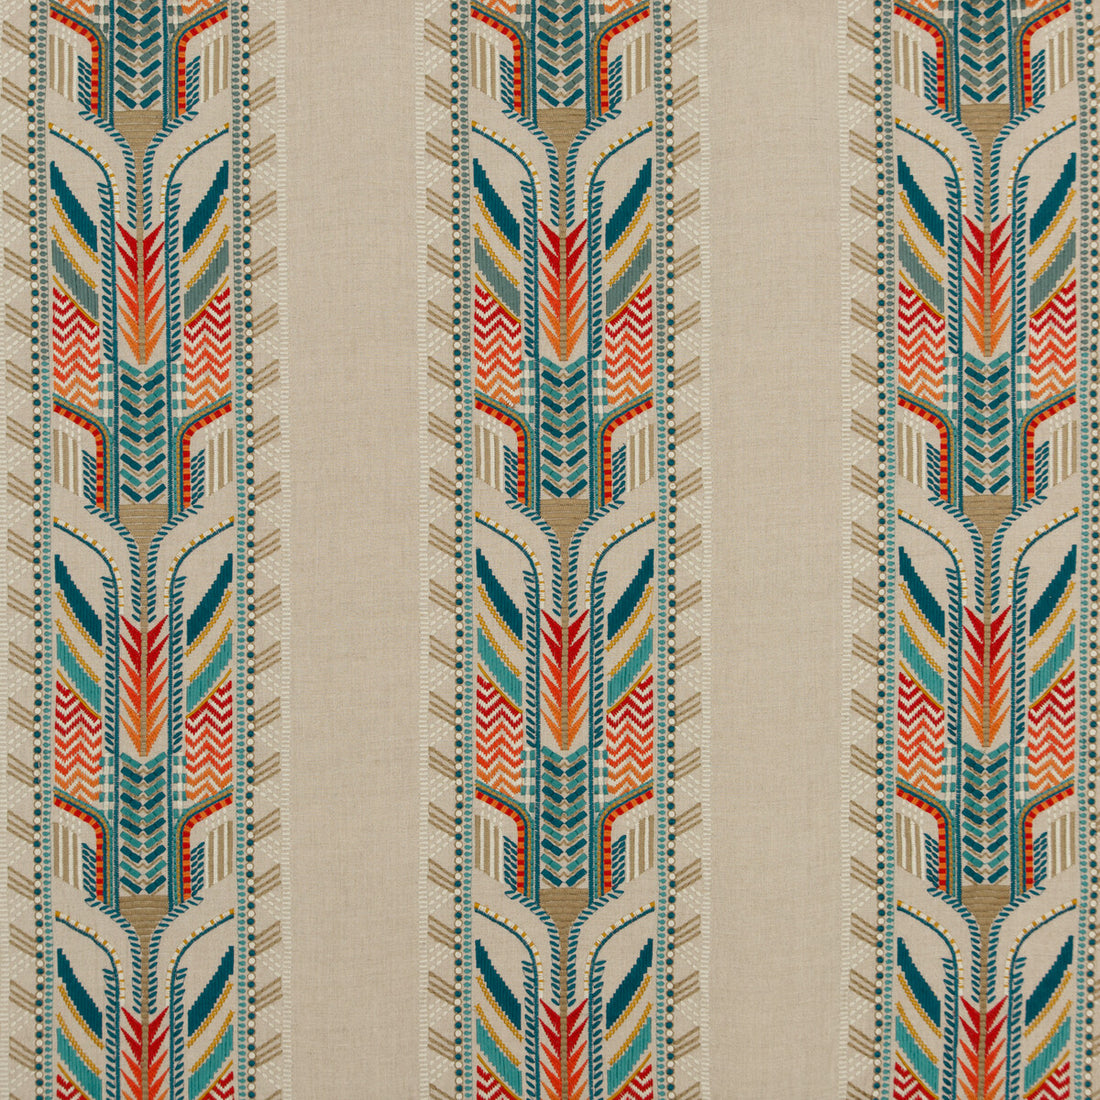 Trebizond fabric in teal color - pattern BF10720.1.0 - by G P &amp; J Baker in the East To West collection